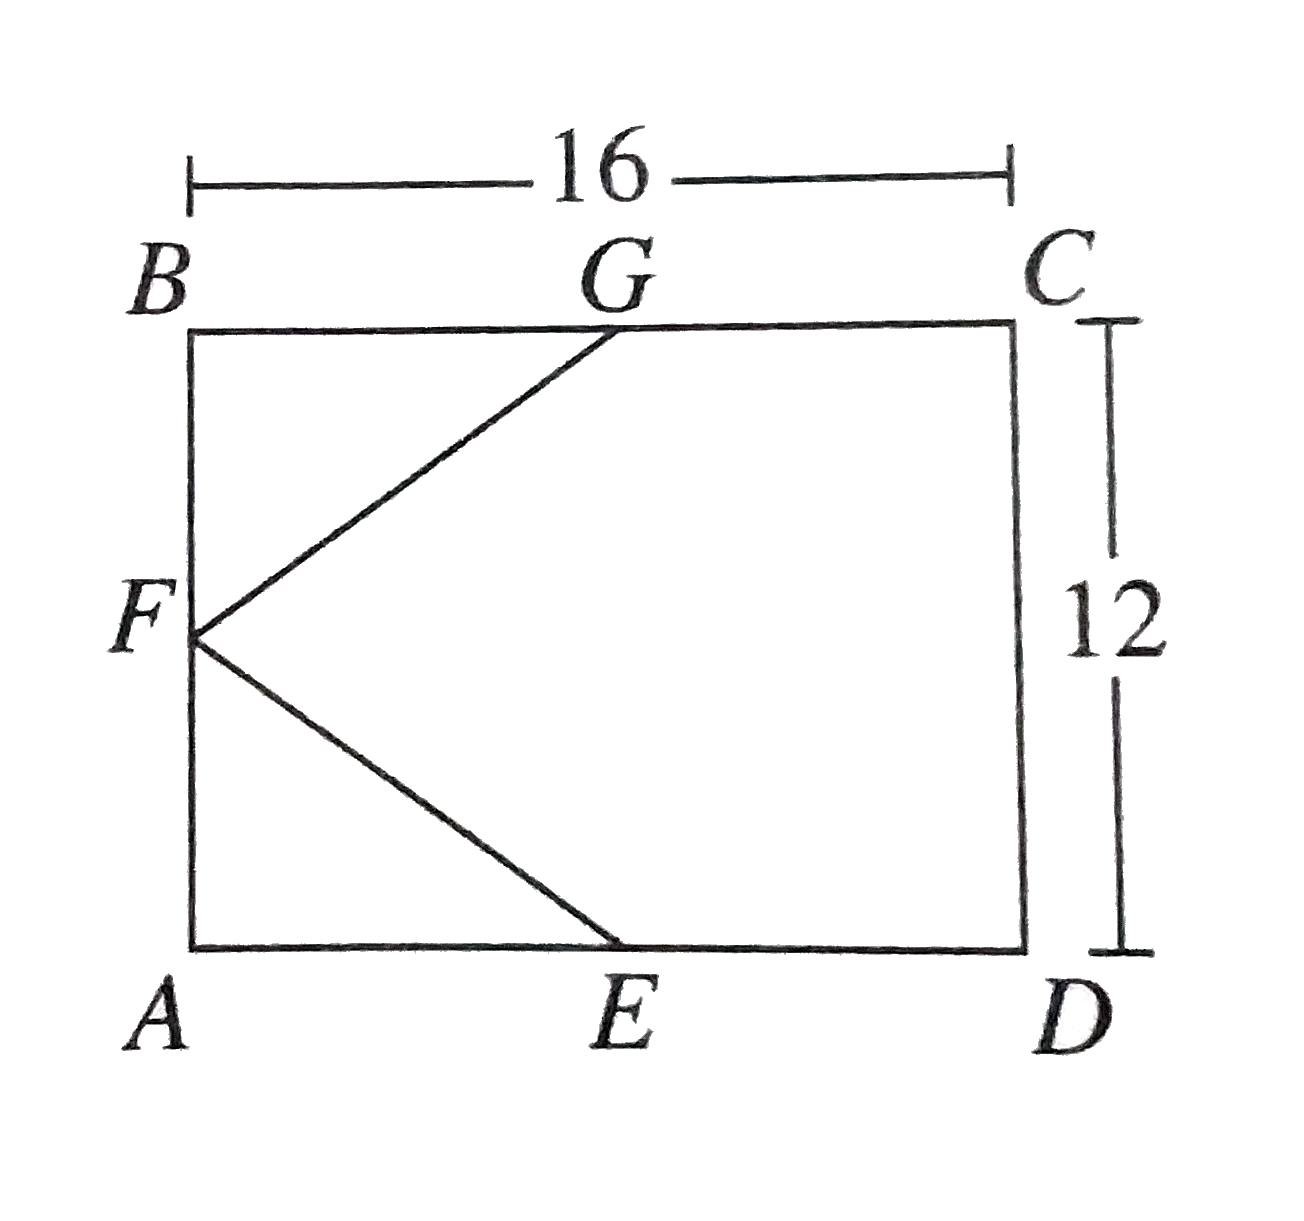 In rectangle  ABCD  below  , bar (BC) is  16  inches  long  and bar(CD )   is 12  inches  long  . Points  E,F and  G are  the midpoints  of  bar(AD )  , bar(AB )  and bar(BC )  respectively . What  is the perimeter  ,in  inches  , of  pentagon CDEFG ?